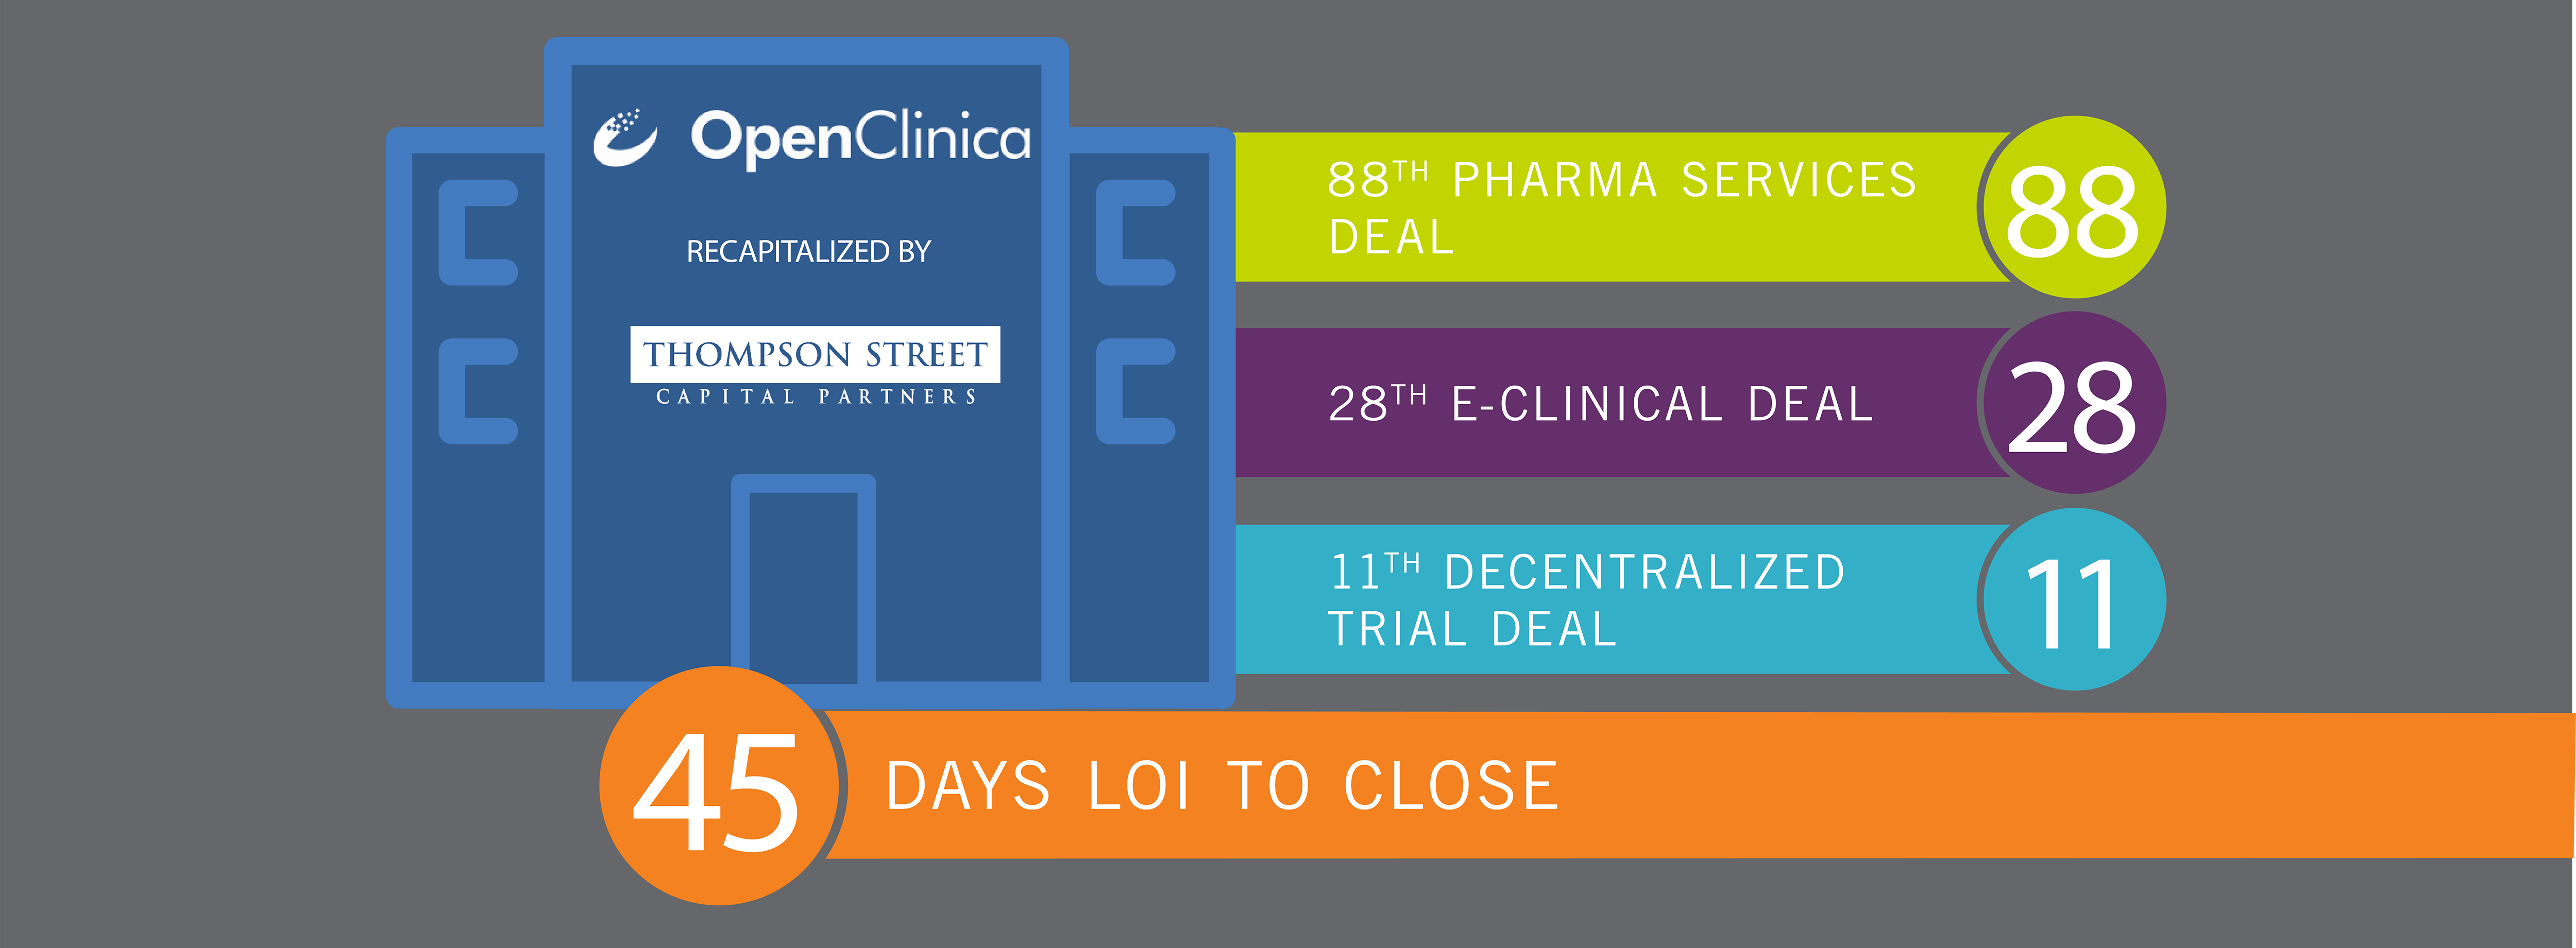 OpenClinica Completes Growth Recapitalization with Thompson Street Capital Partners to Accelerate Enablement of Clinical Trials